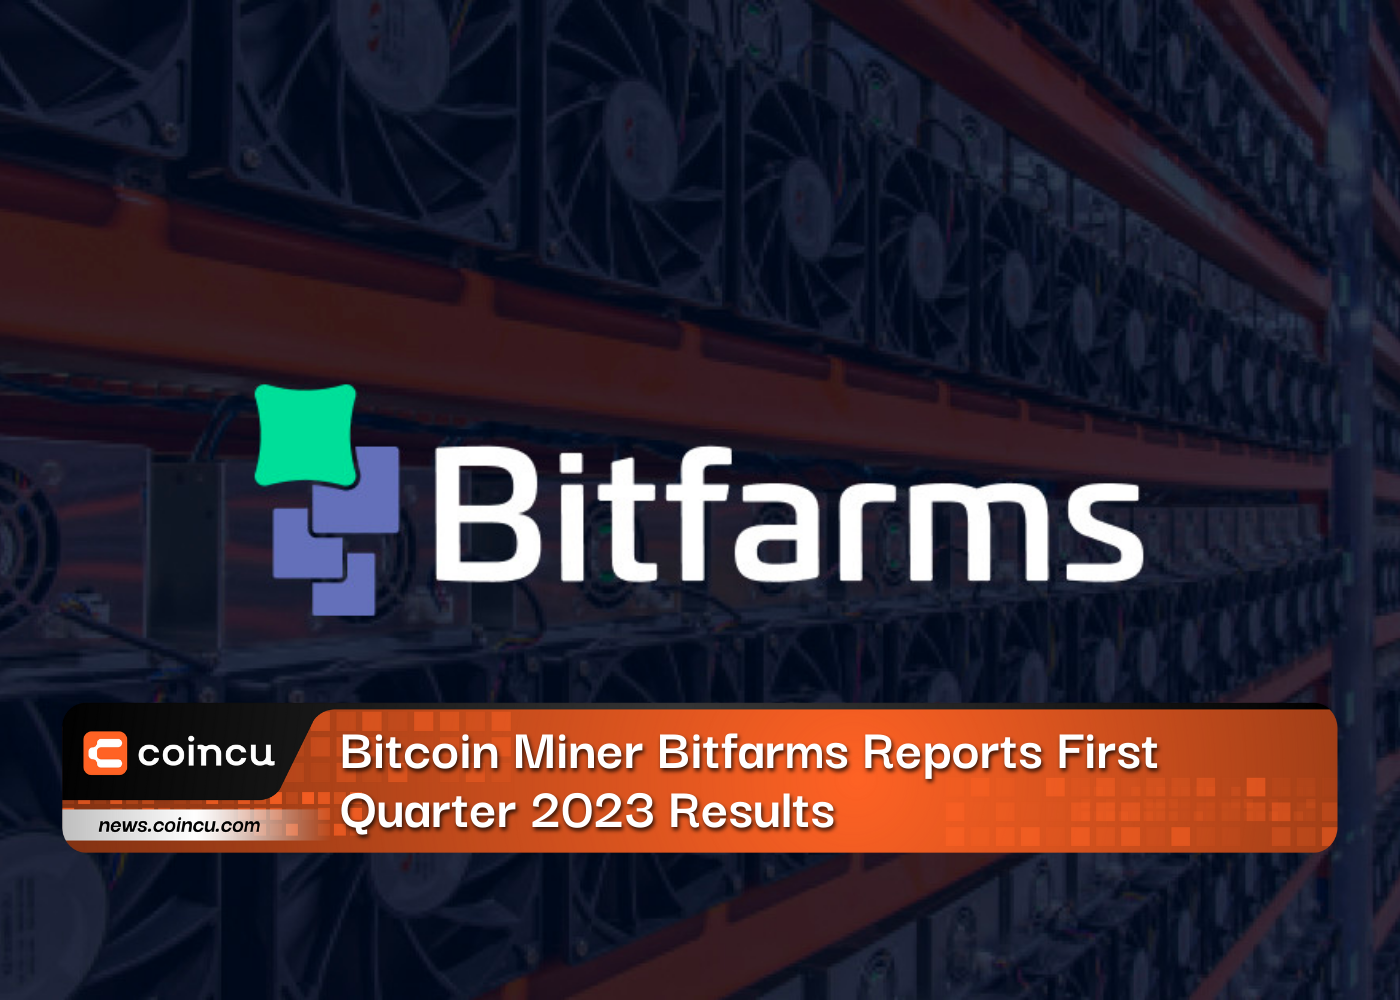 Bitcoin Miner Bitfarms Reports First Quarter 2023 Results